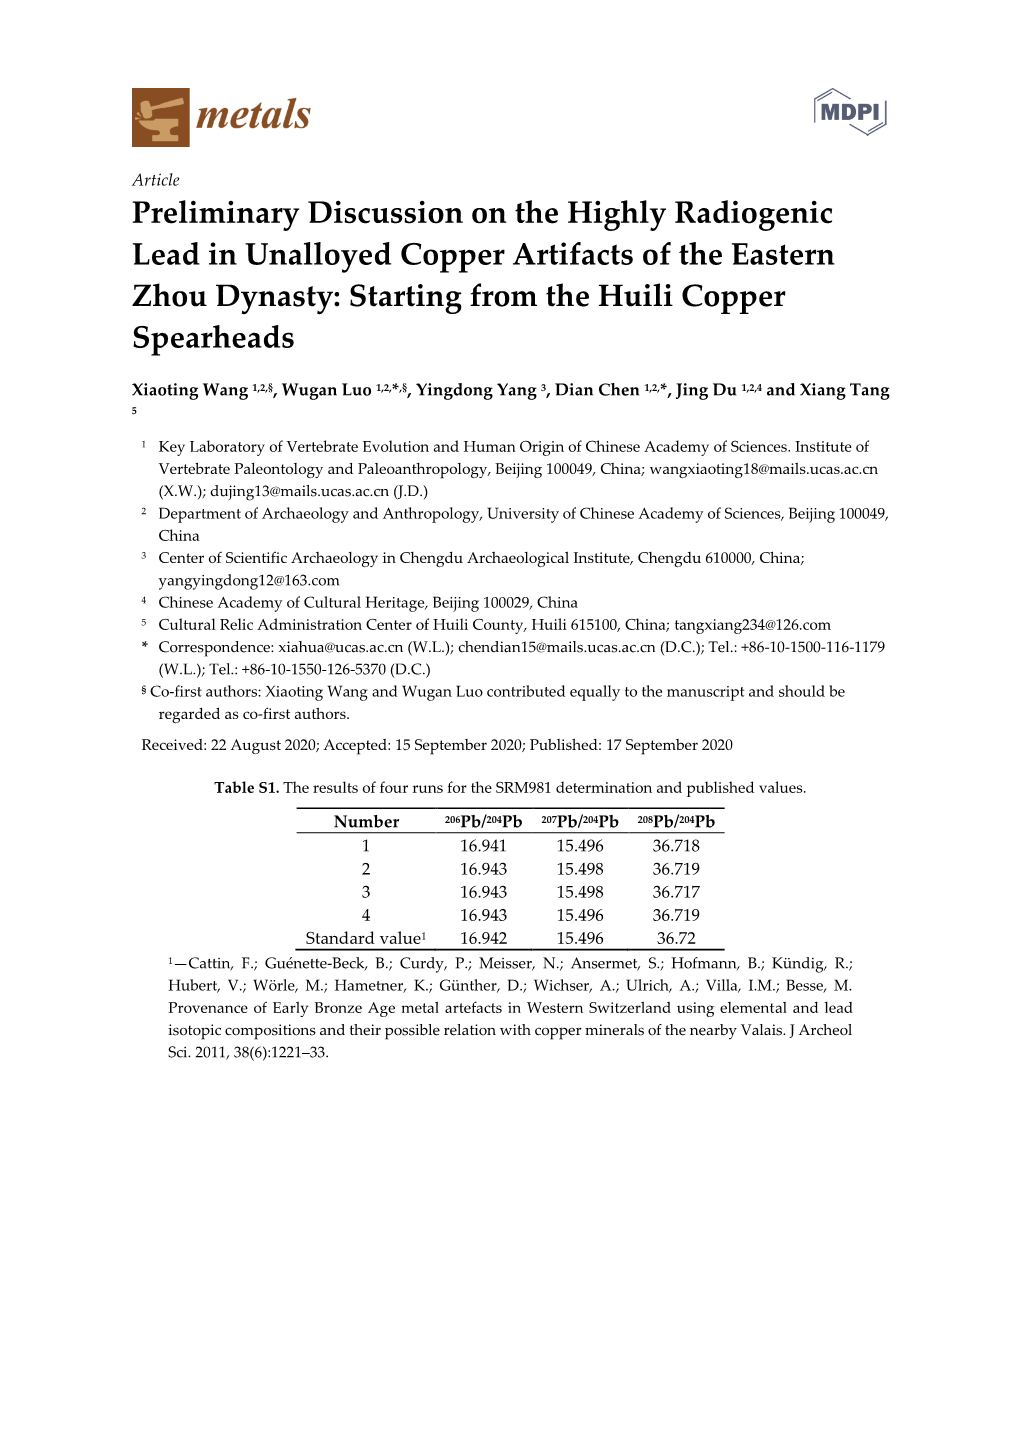 Preliminary Discussion on the Highly Radiogenic Lead in Unalloyed Copper Artifacts of the Eastern Zhou Dynasty: Starting from the Huili Copper Spearheads